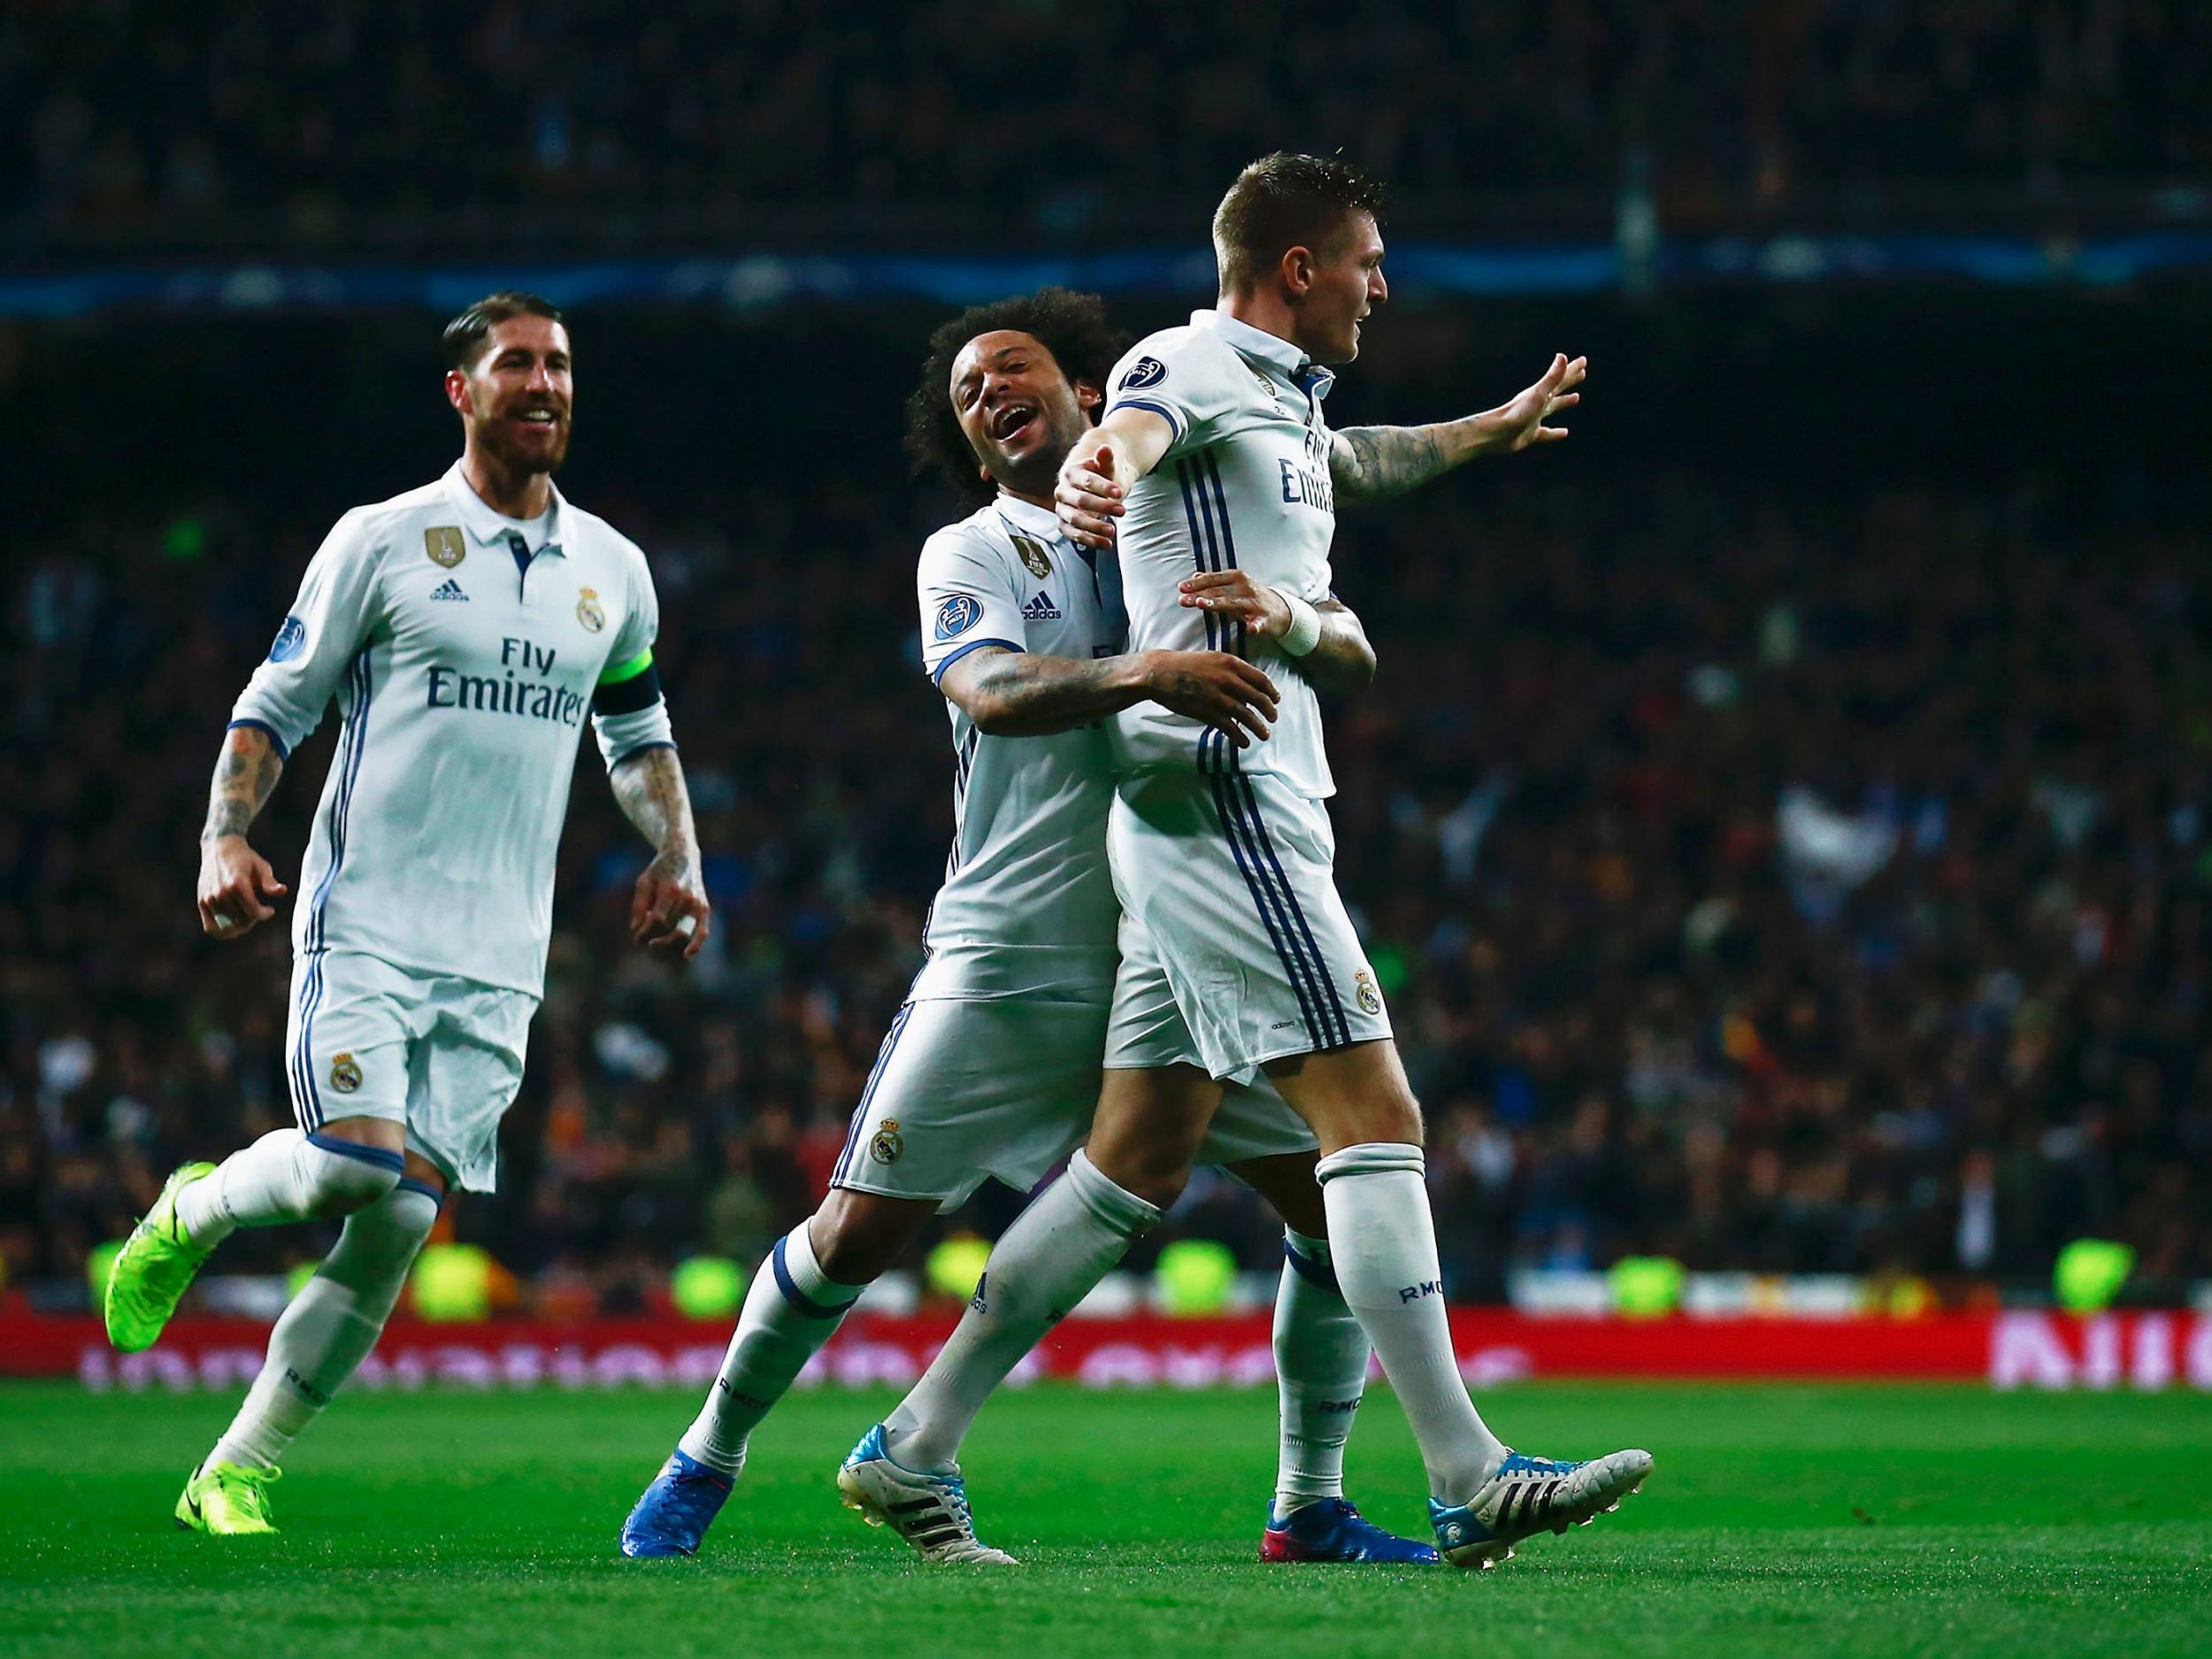 Toni Kroos scored Madrid's second with a perfect finish past Pepe Reina